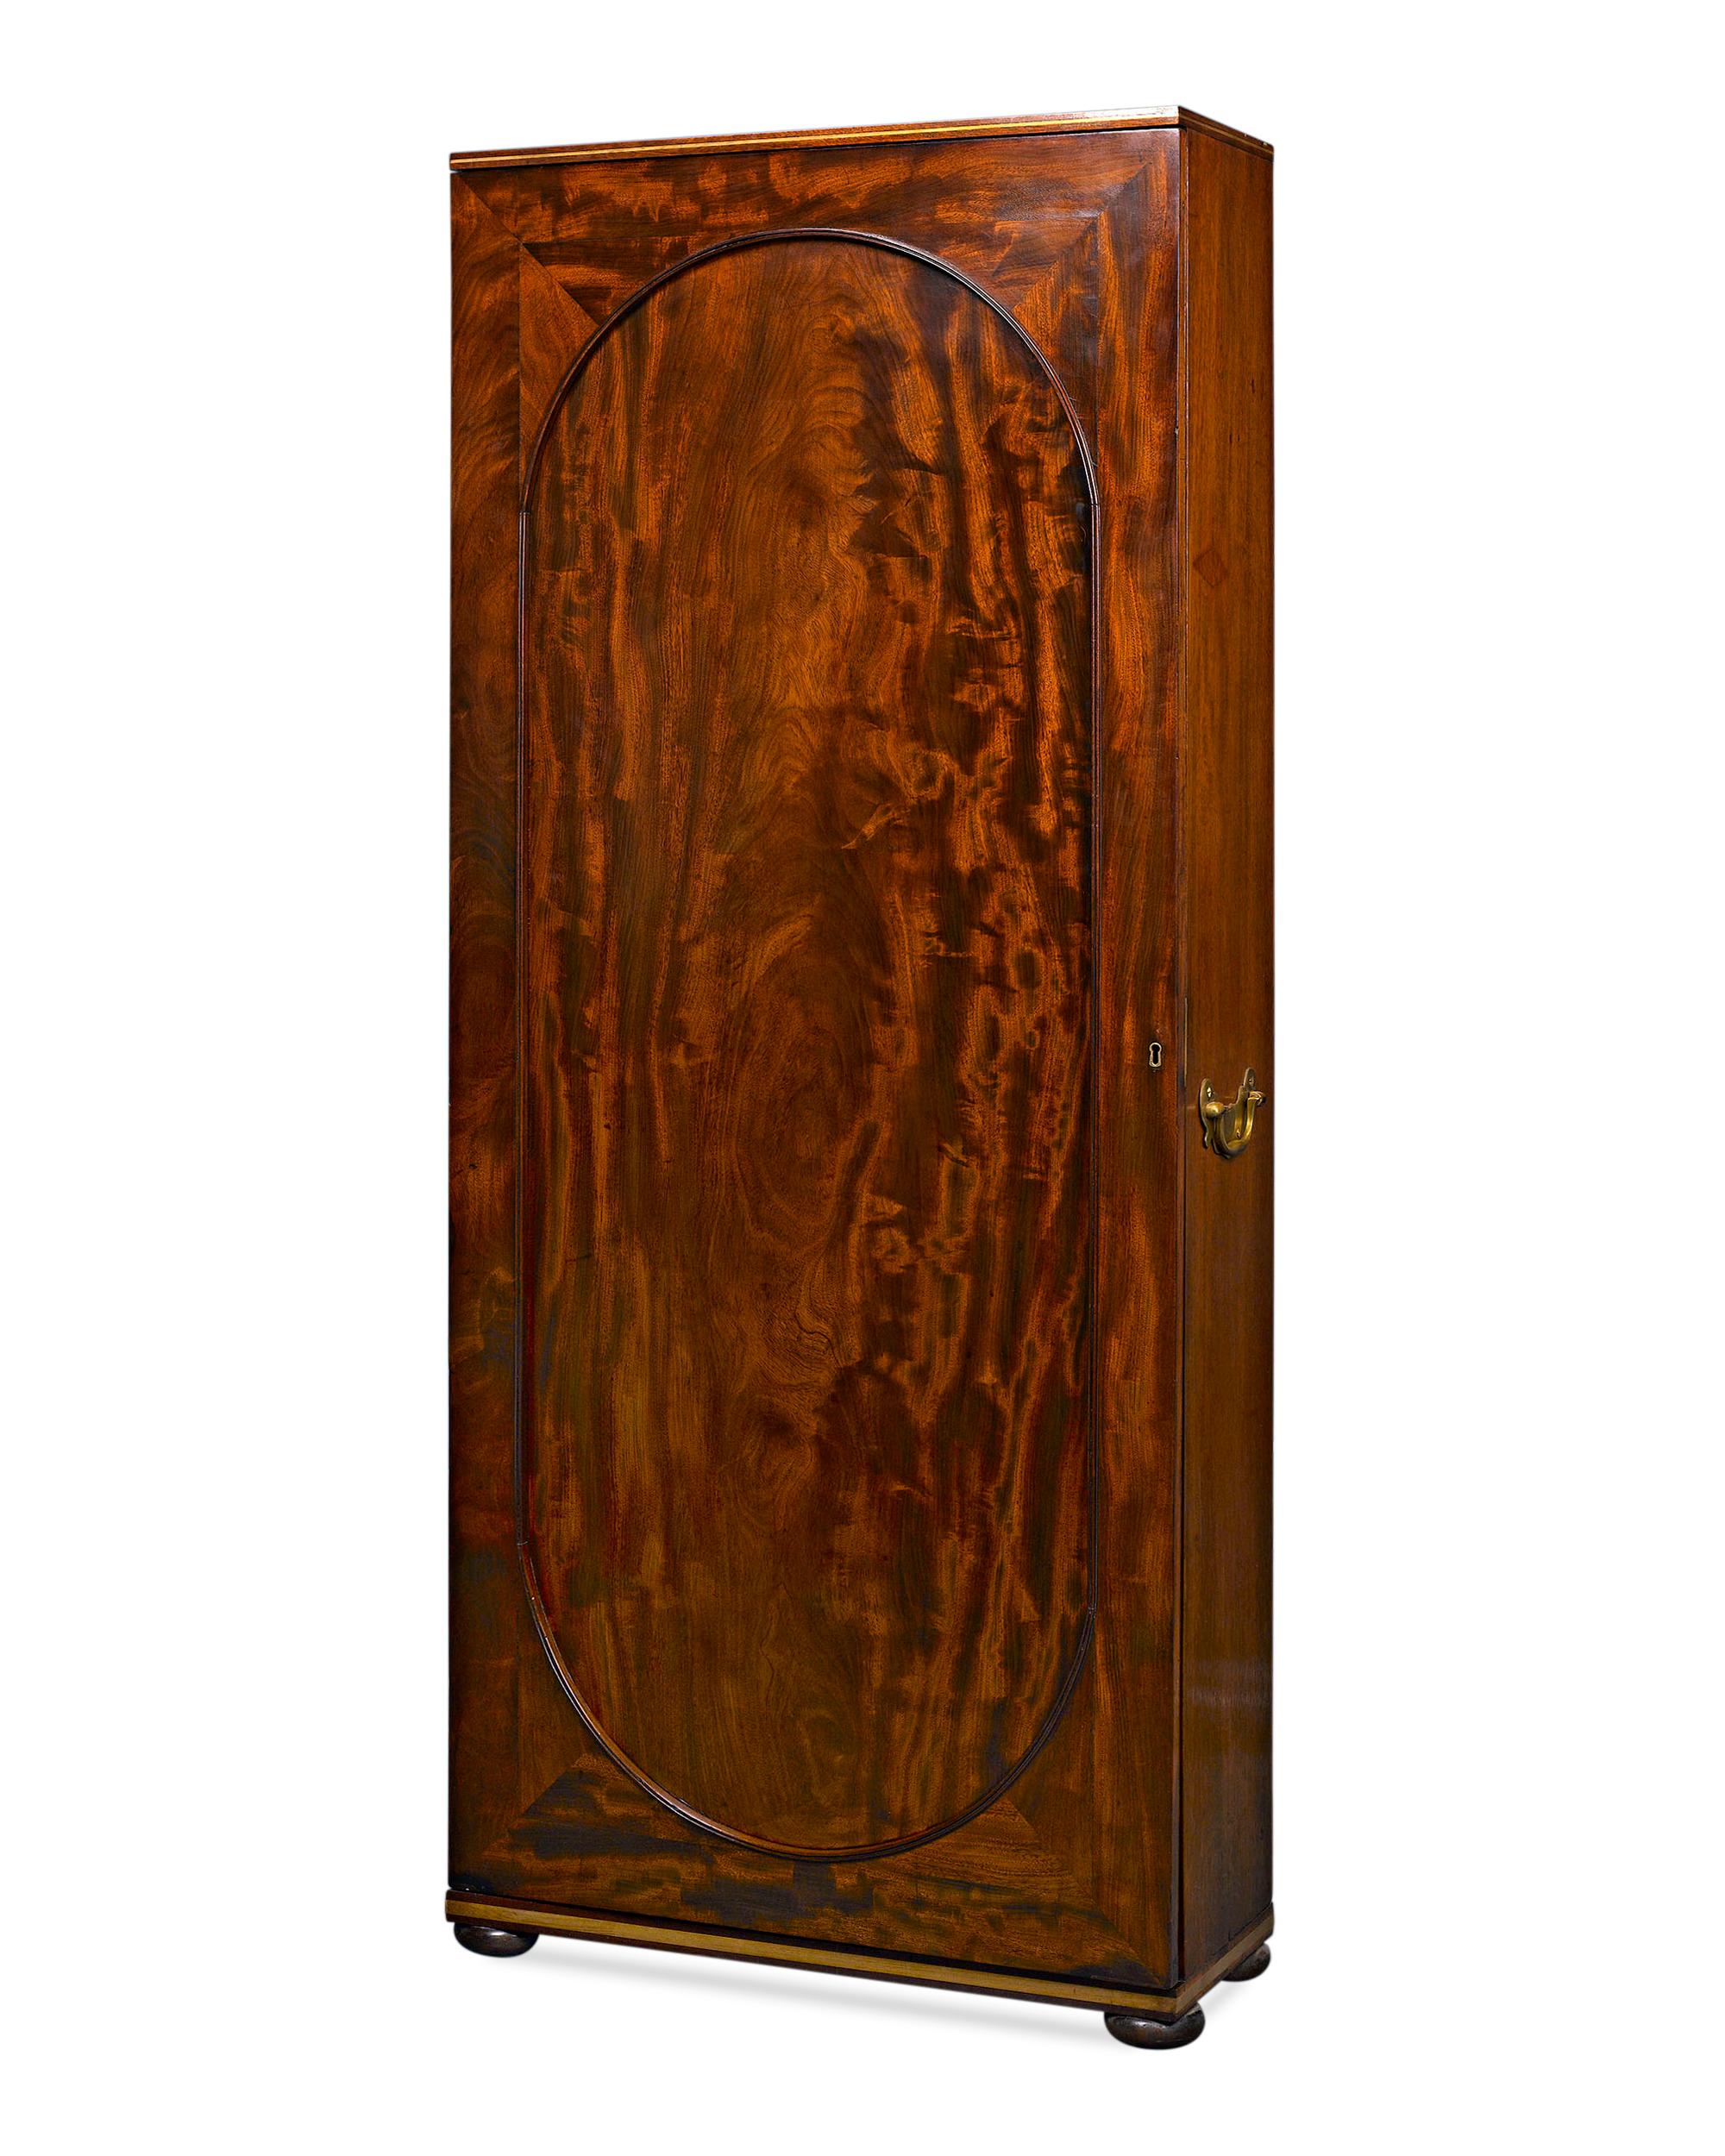 19th Century English Upright Cane Cabinet For Sale